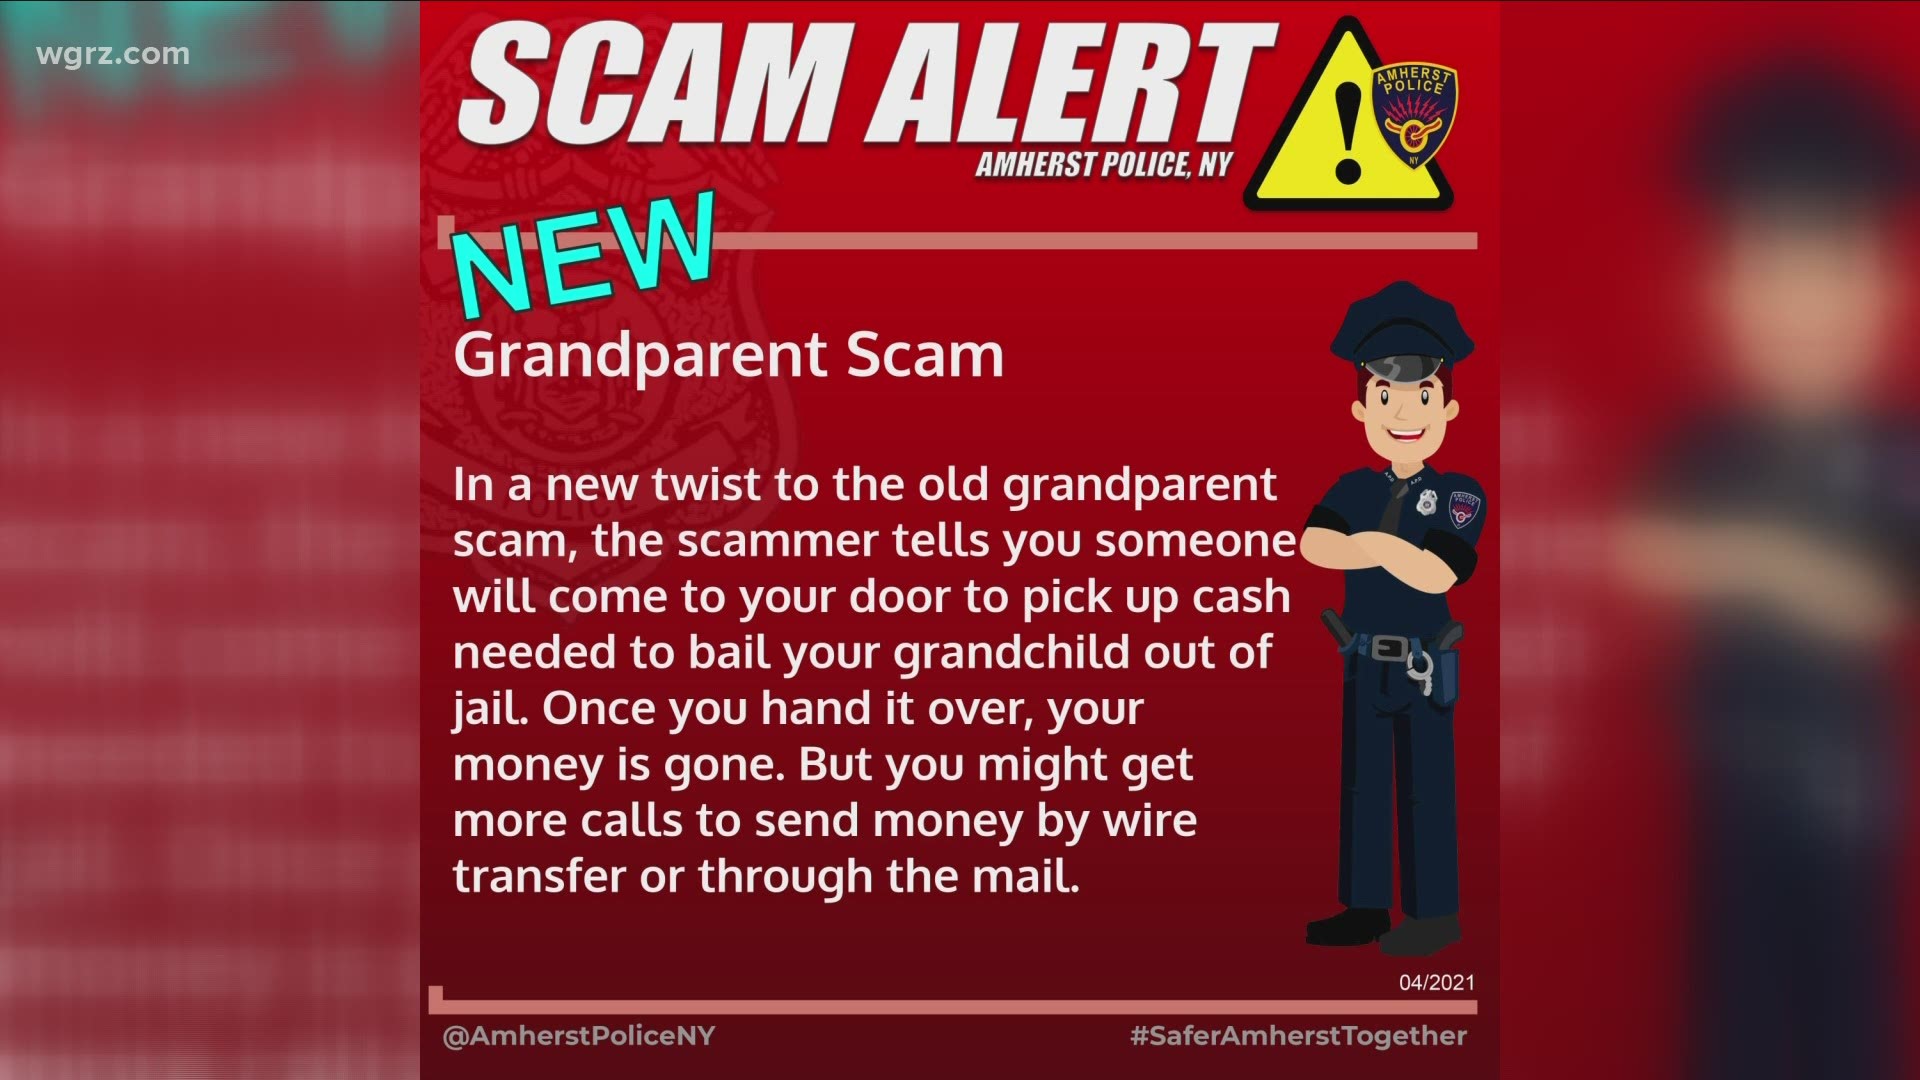 A new twist to the old grandparent scam